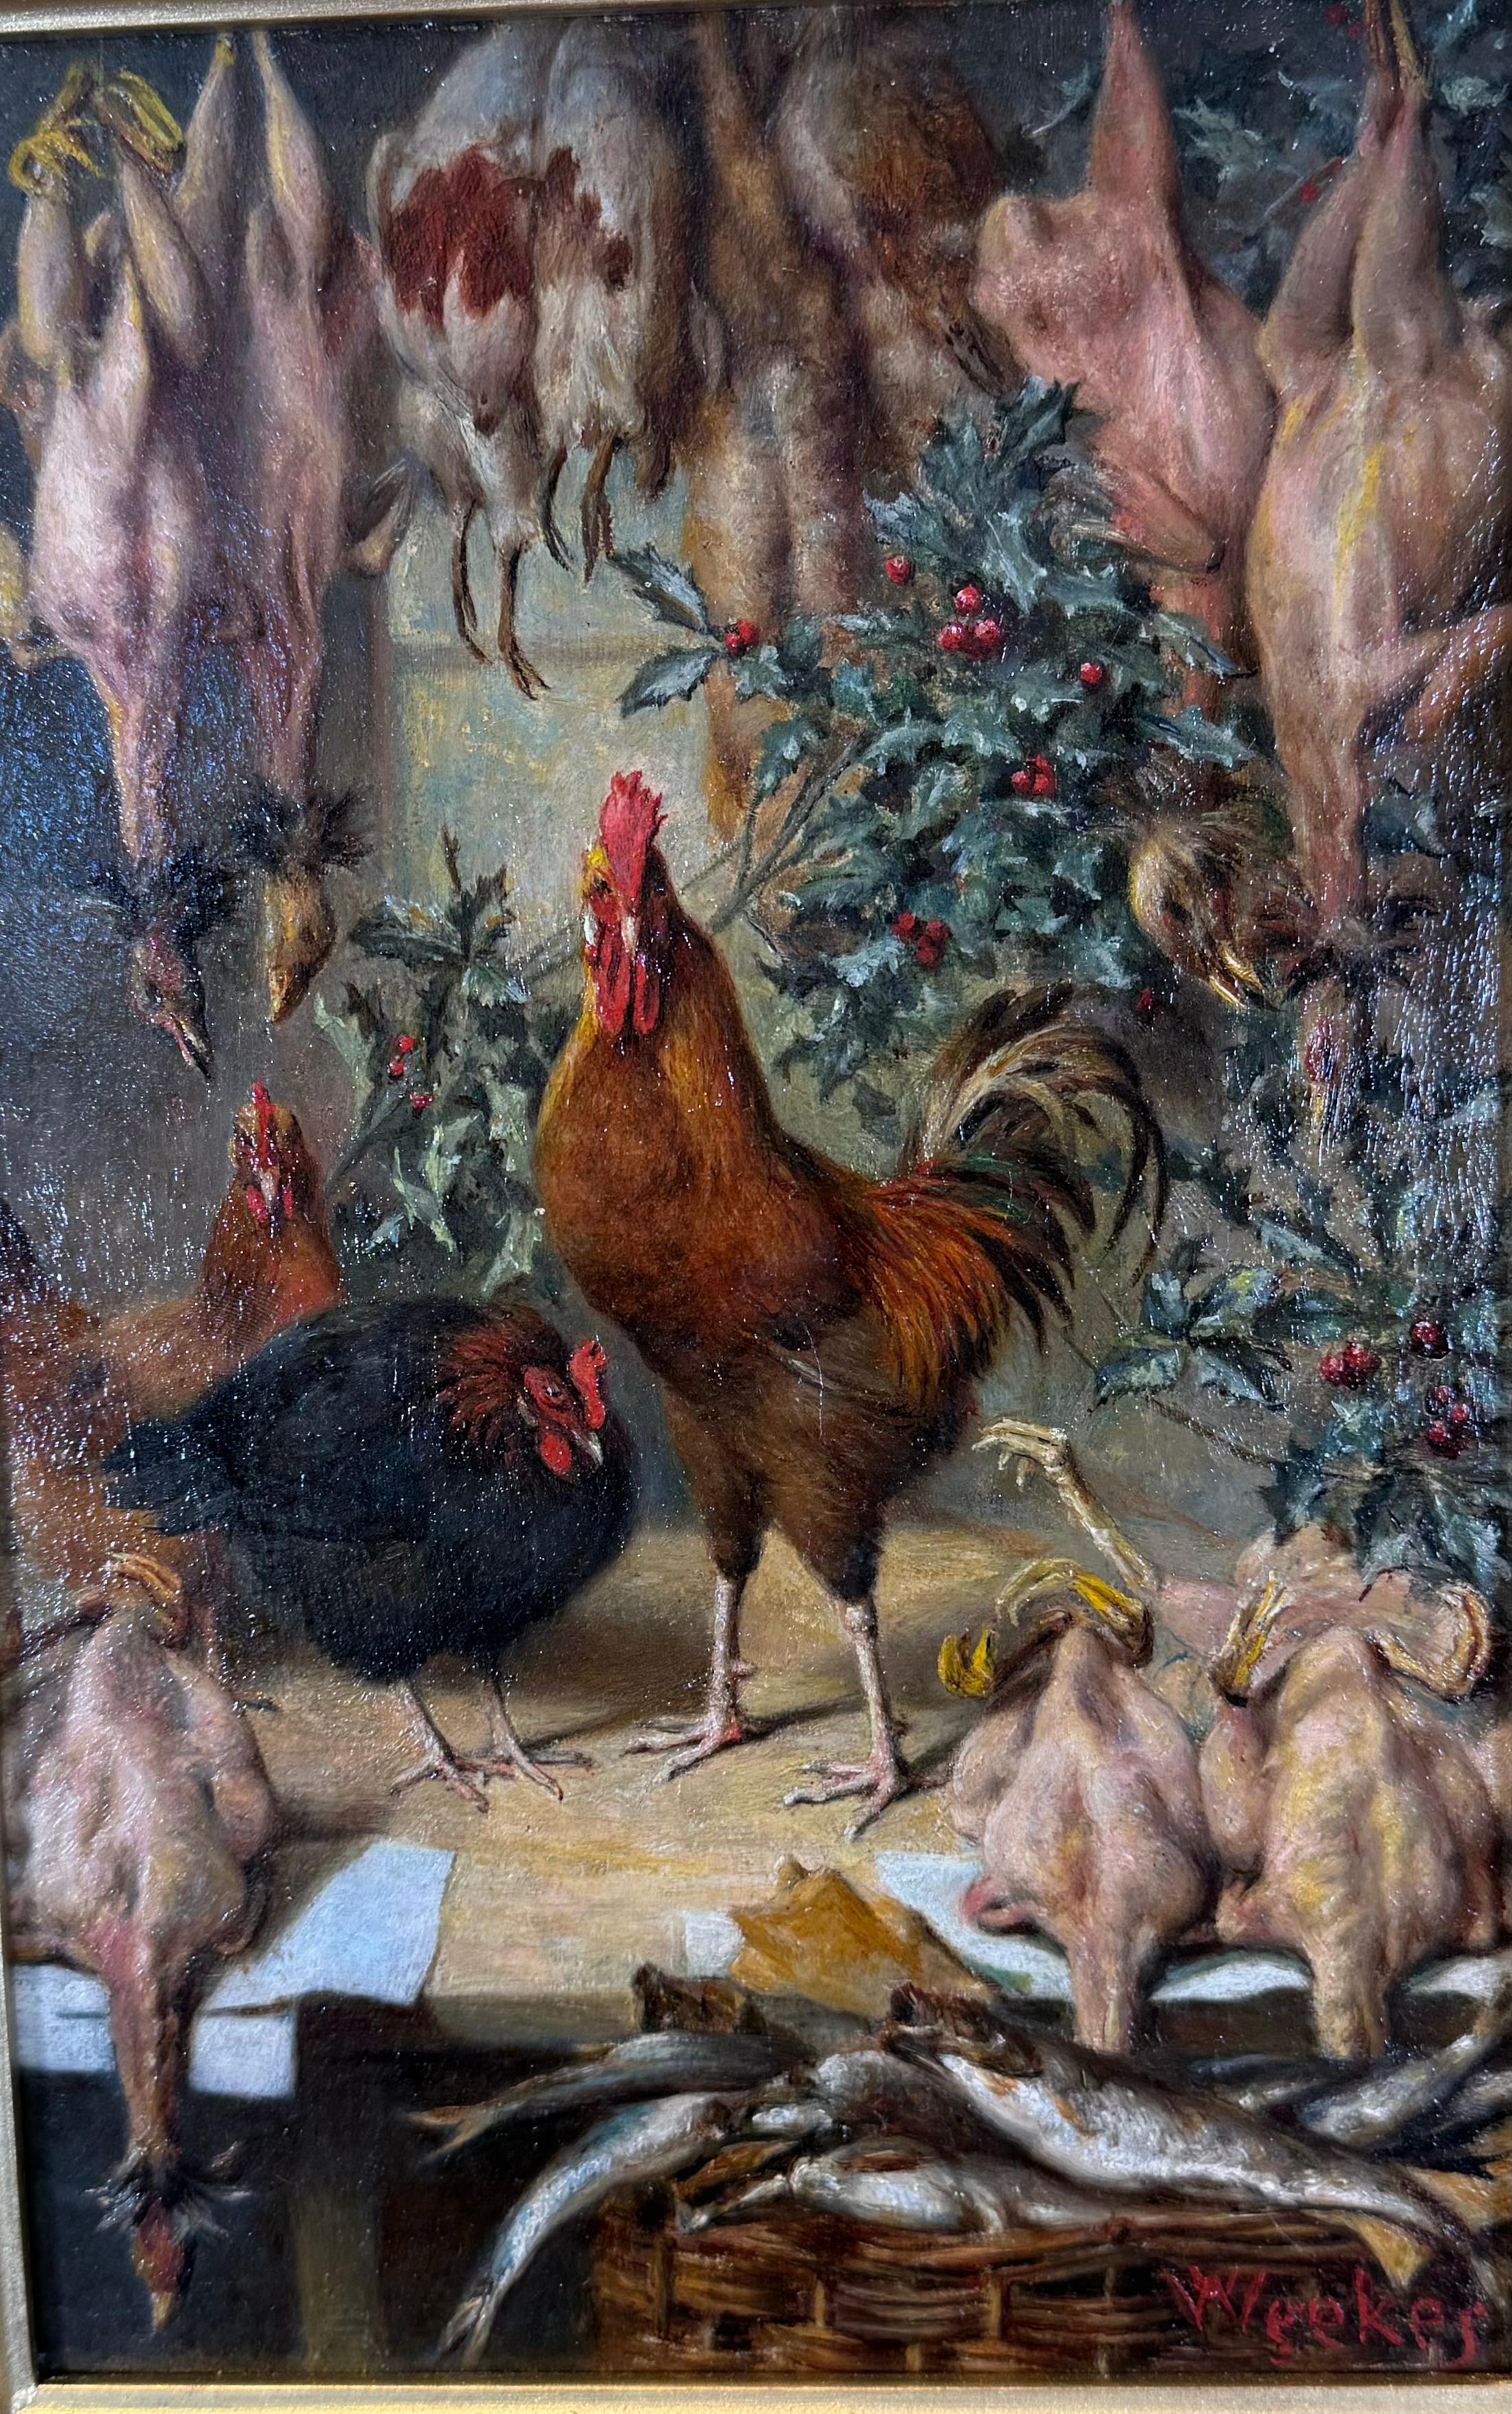 Herbert William Weekes was a Victorian Neo Classical artist from Pimlico, London. He was the son of the Sculptor and Royal Academician Henry Weekes. He was one of a few talented artists who transformed animal paintings of the 19th century from its